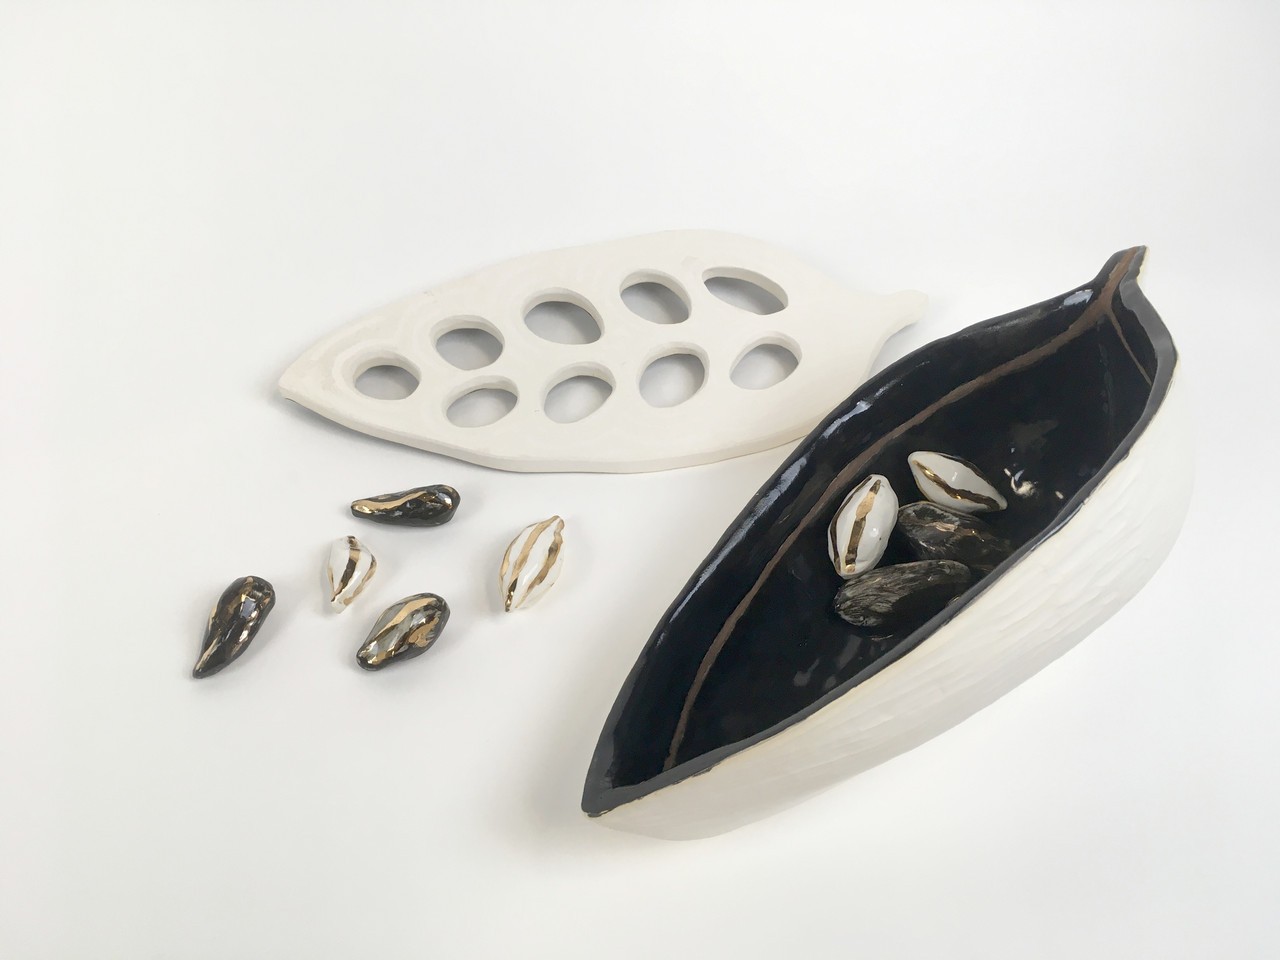 Picture of the full artwork. The documentation shows a small grouping of  small groupings of black and white glazed earthenware with gold luster displayed outside and inside the cacao bean. We can see the interior of the bean which is black with gold luster streaks and its white matte exterior. Along side the ceramic vessel there is a white matte ceramic leaf shaped piece with holes echoing the shape of the beans. 